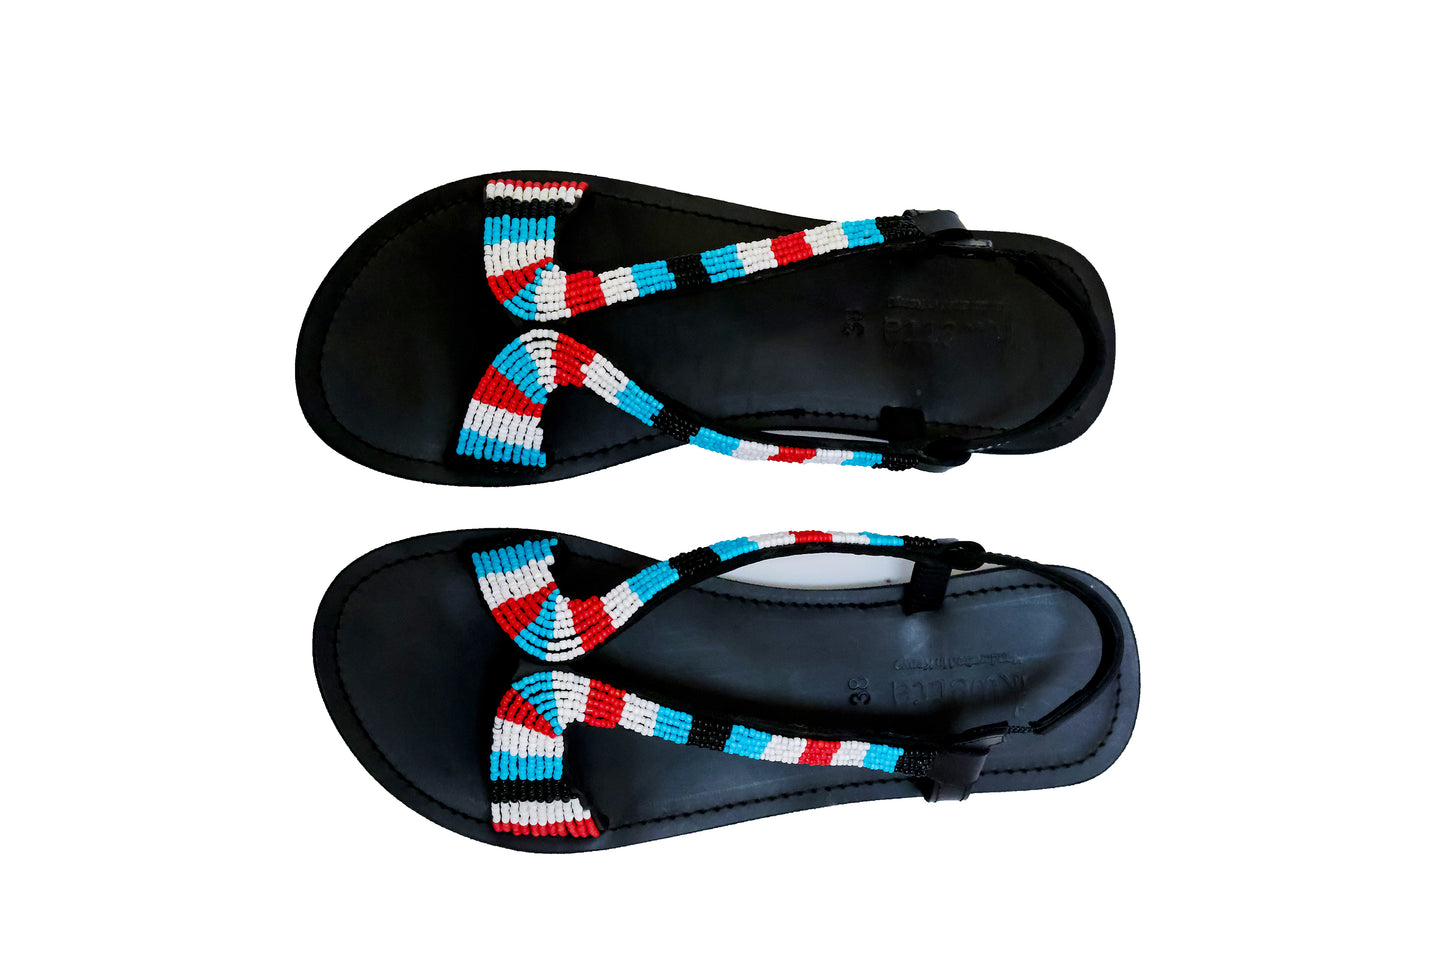 Alina sandals in Black smooth and Maasai beaded upper straps